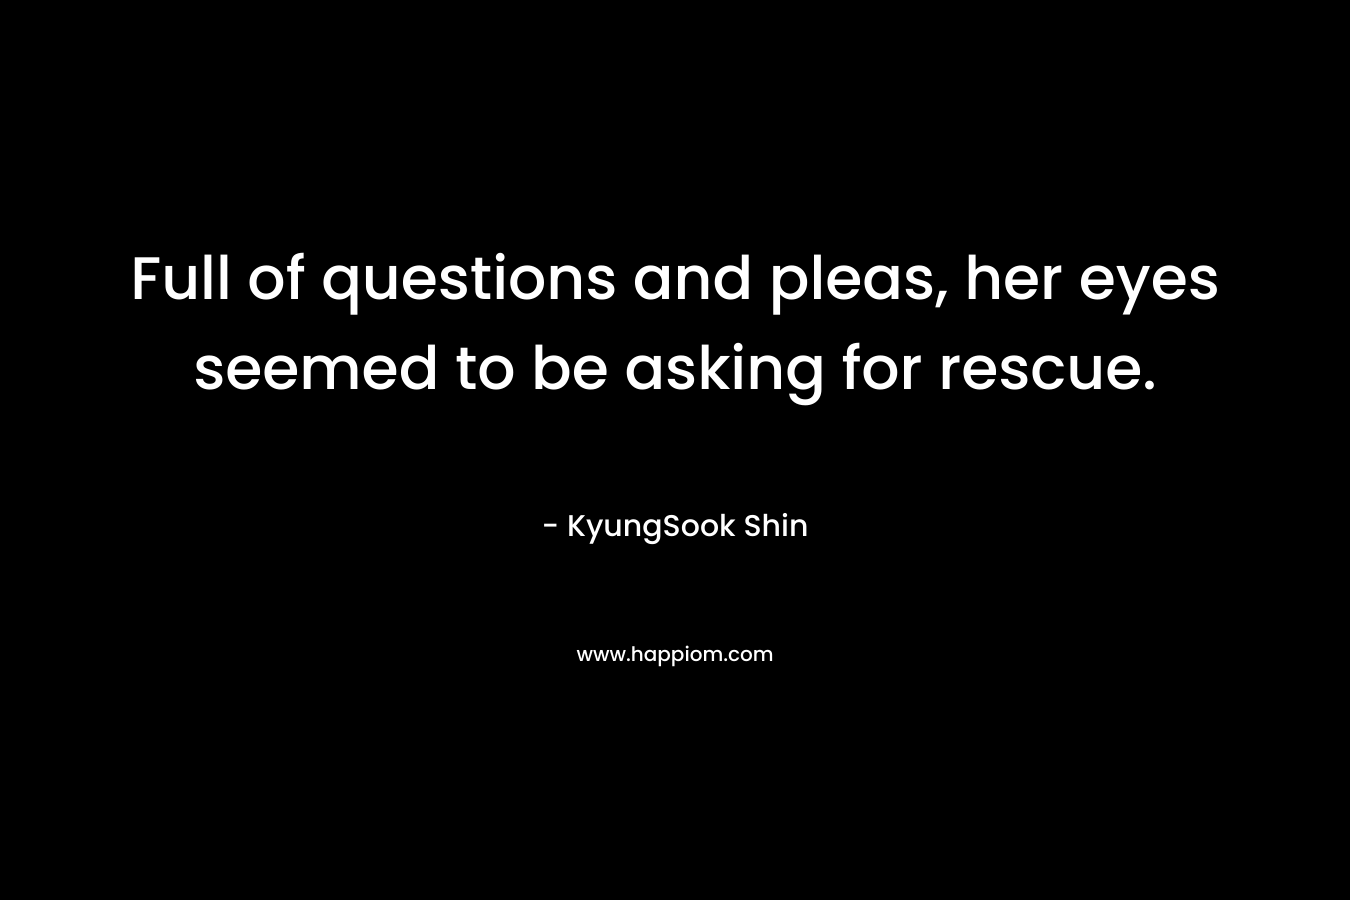 Full of questions and pleas, her eyes seemed to be asking for rescue. – KyungSook Shin